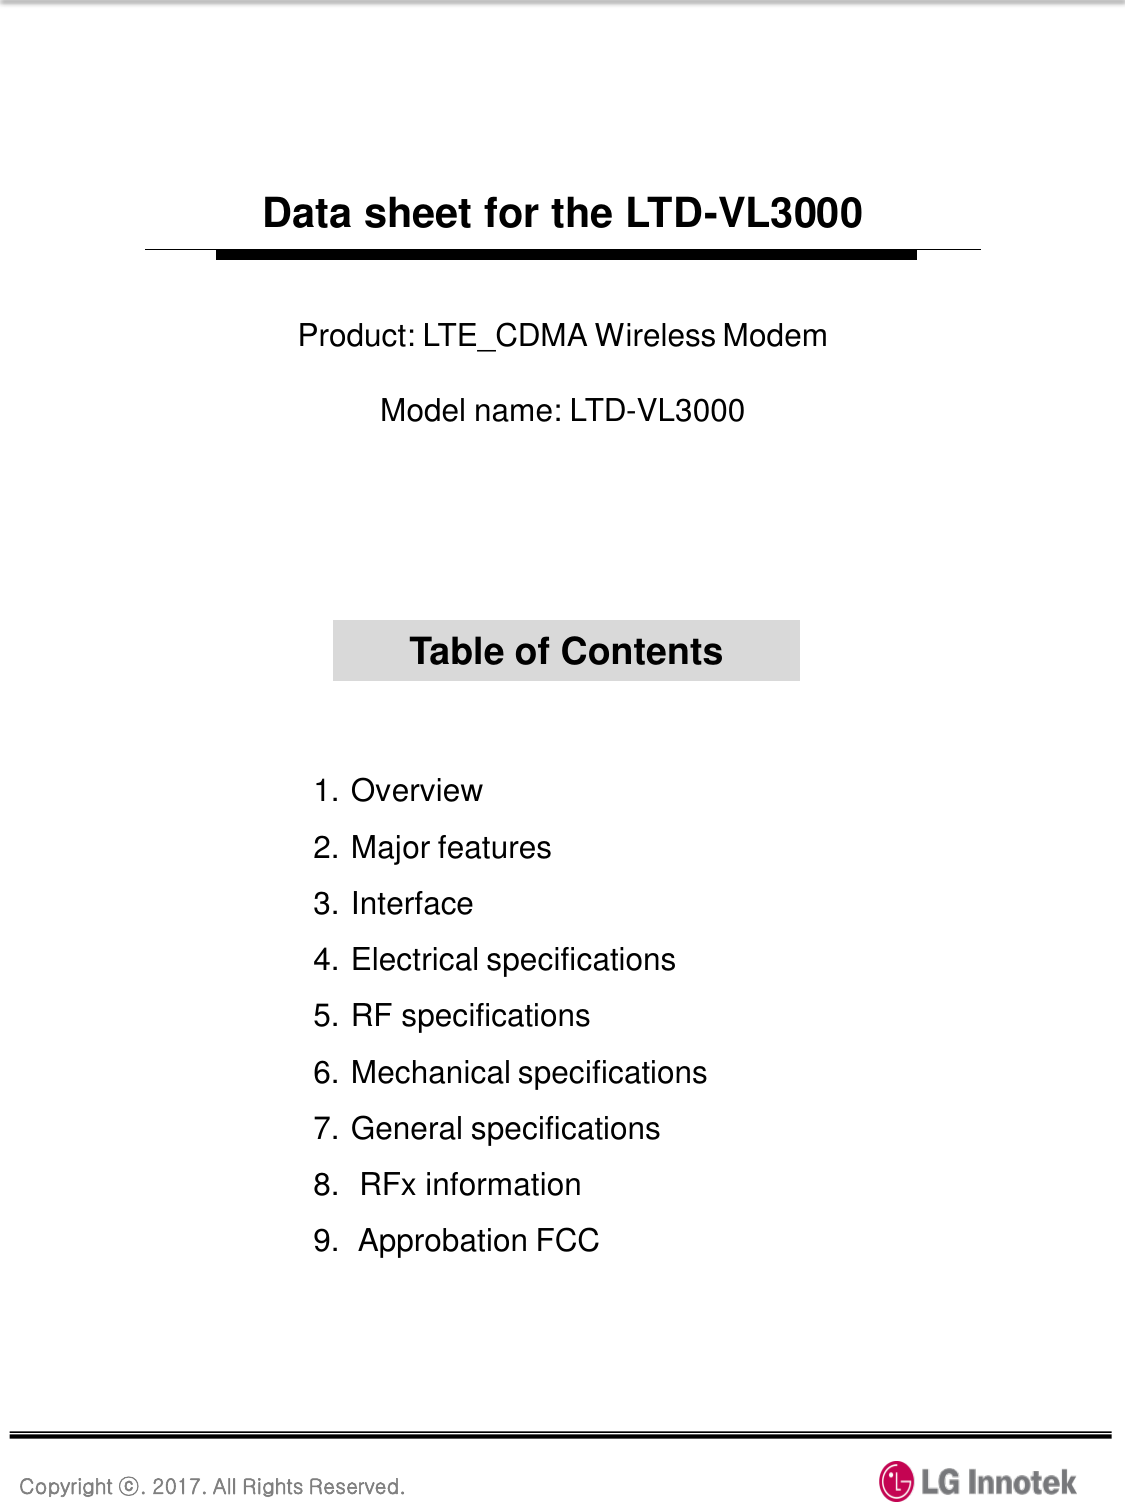 Copyright ⓒ. 2017. All Rights Reserved. Data sheet for the LTD-VL3000 1. Overview 2. Major features 3. Interface 4. Electrical specifications 5. RF specifications 6. Mechanical specifications 7. General specifications 8.  RFx information 9.  Approbation FCC Table of Contents Product: LTE_CDMA Wireless Modem  Model name: LTD-VL3000 